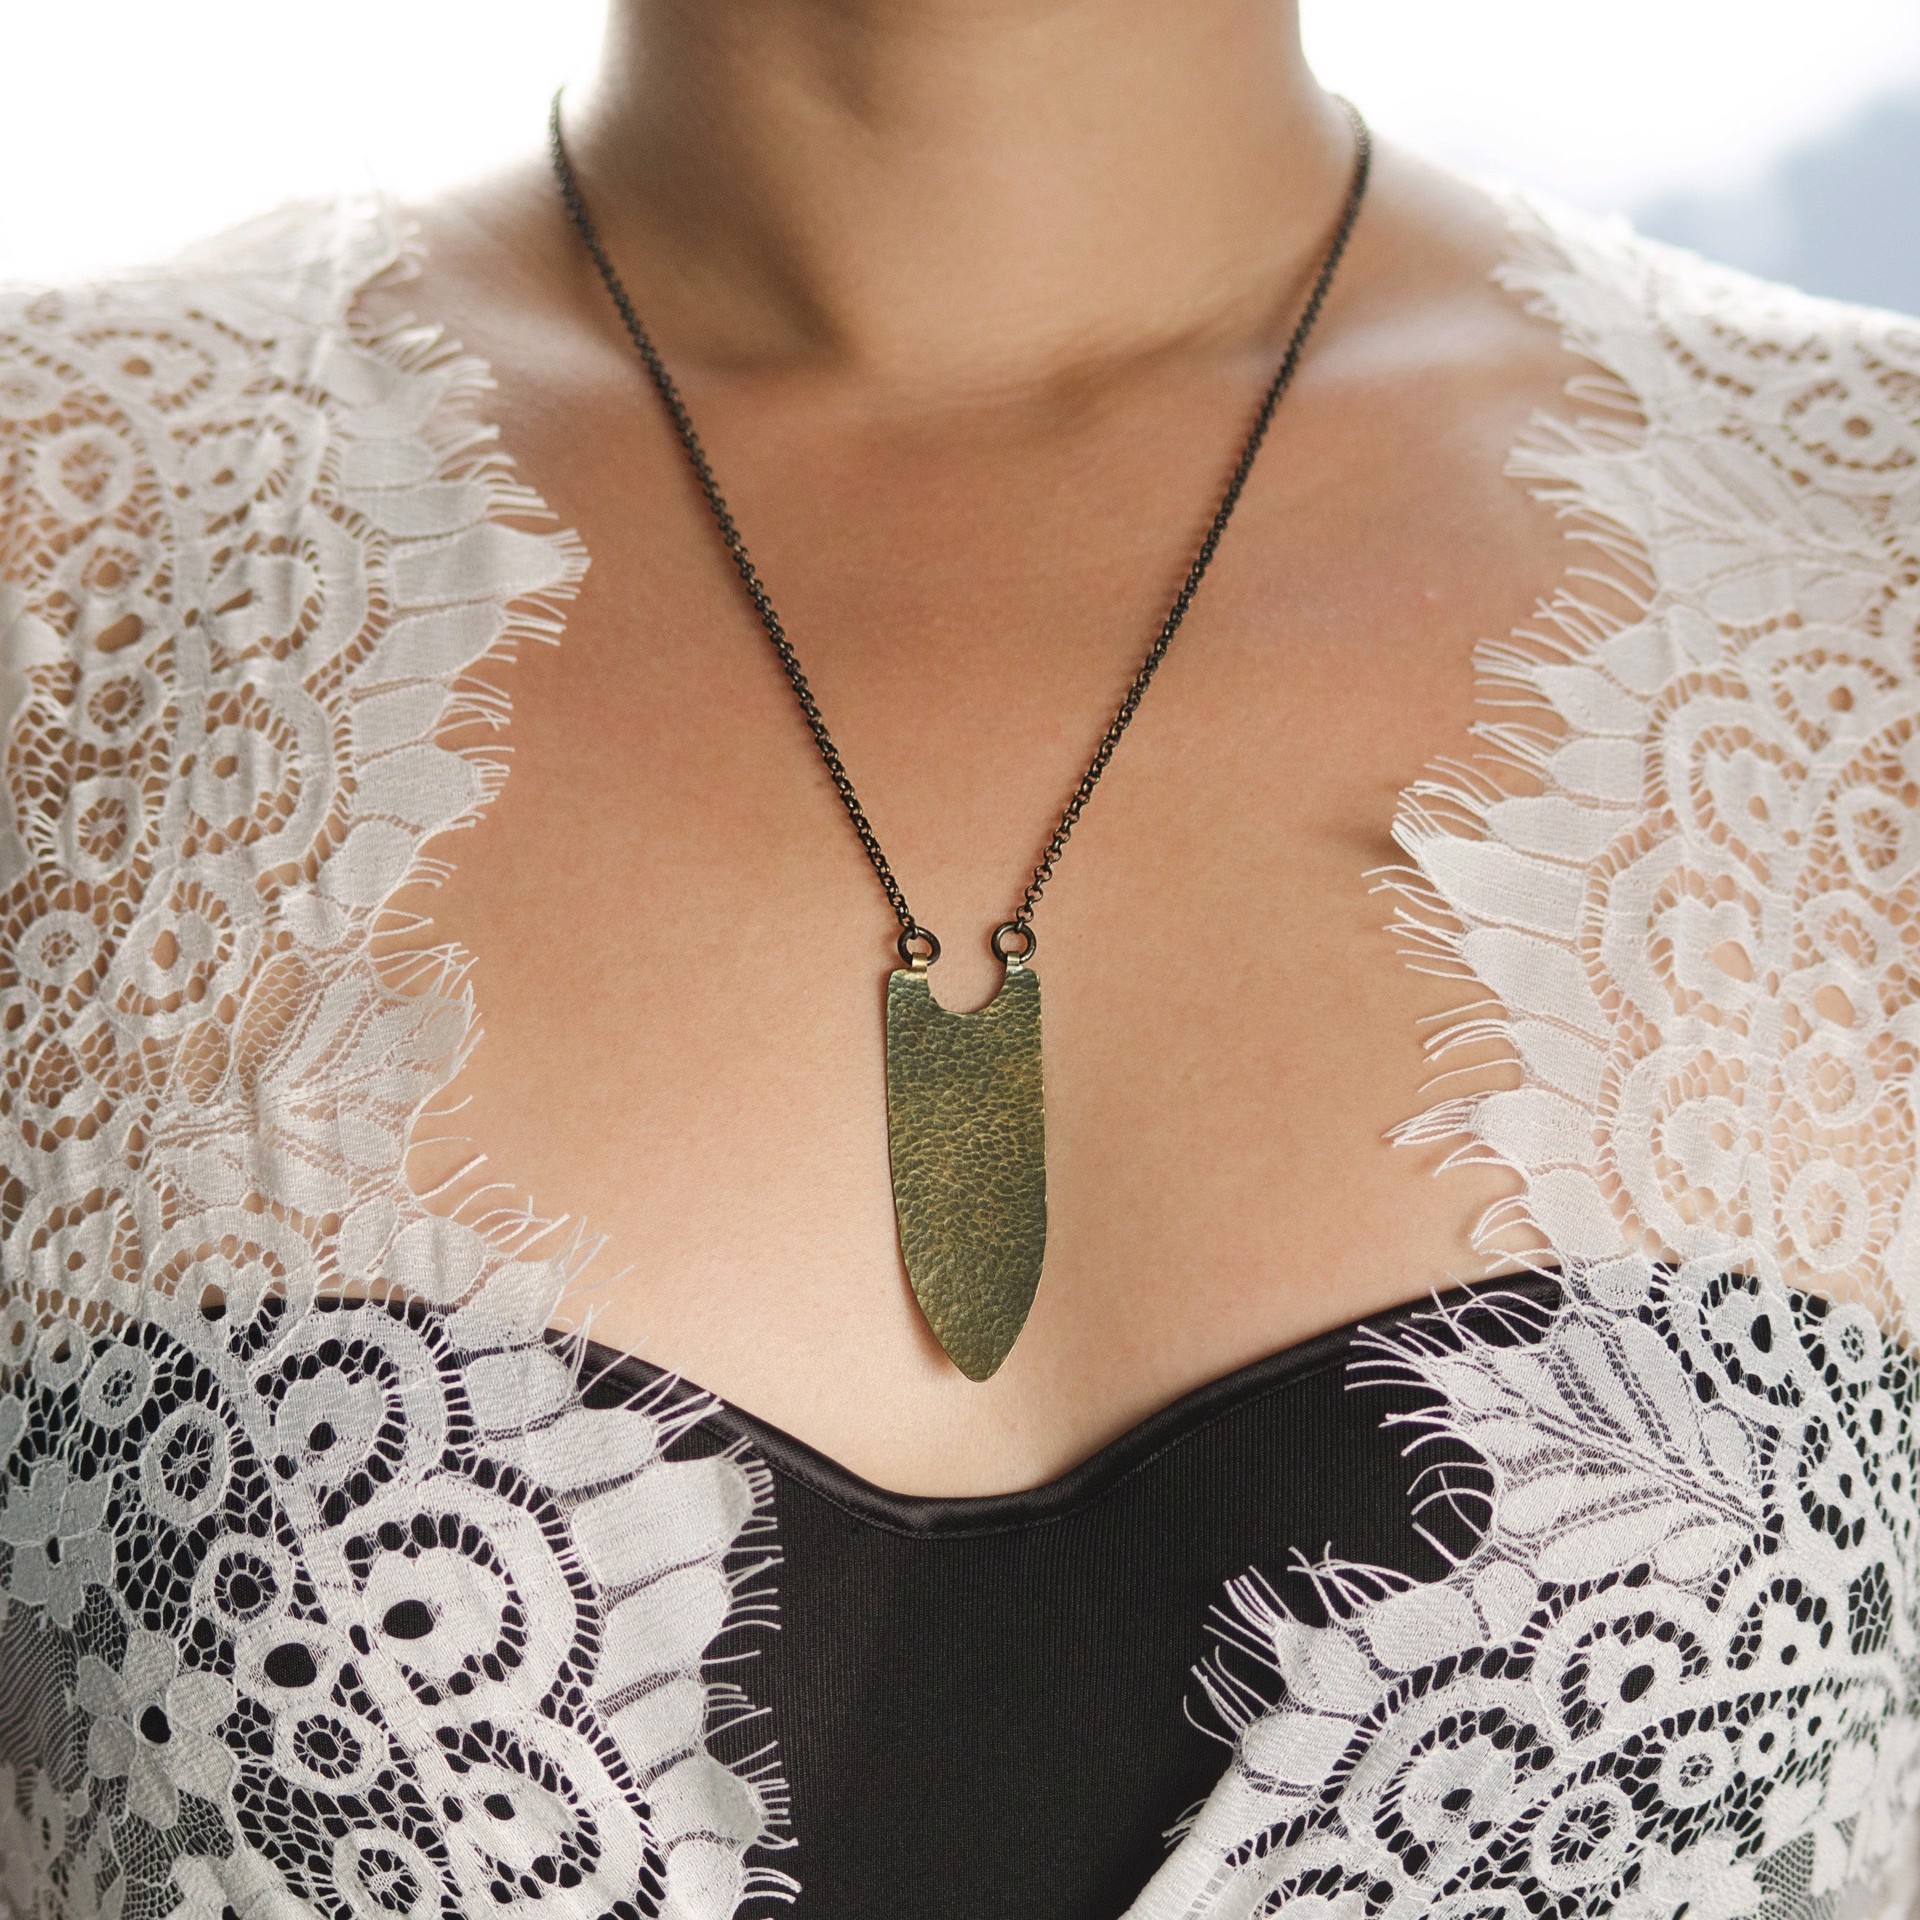 Banner Necklace in Antiqued Brass by Clementine & Co. Jewelry